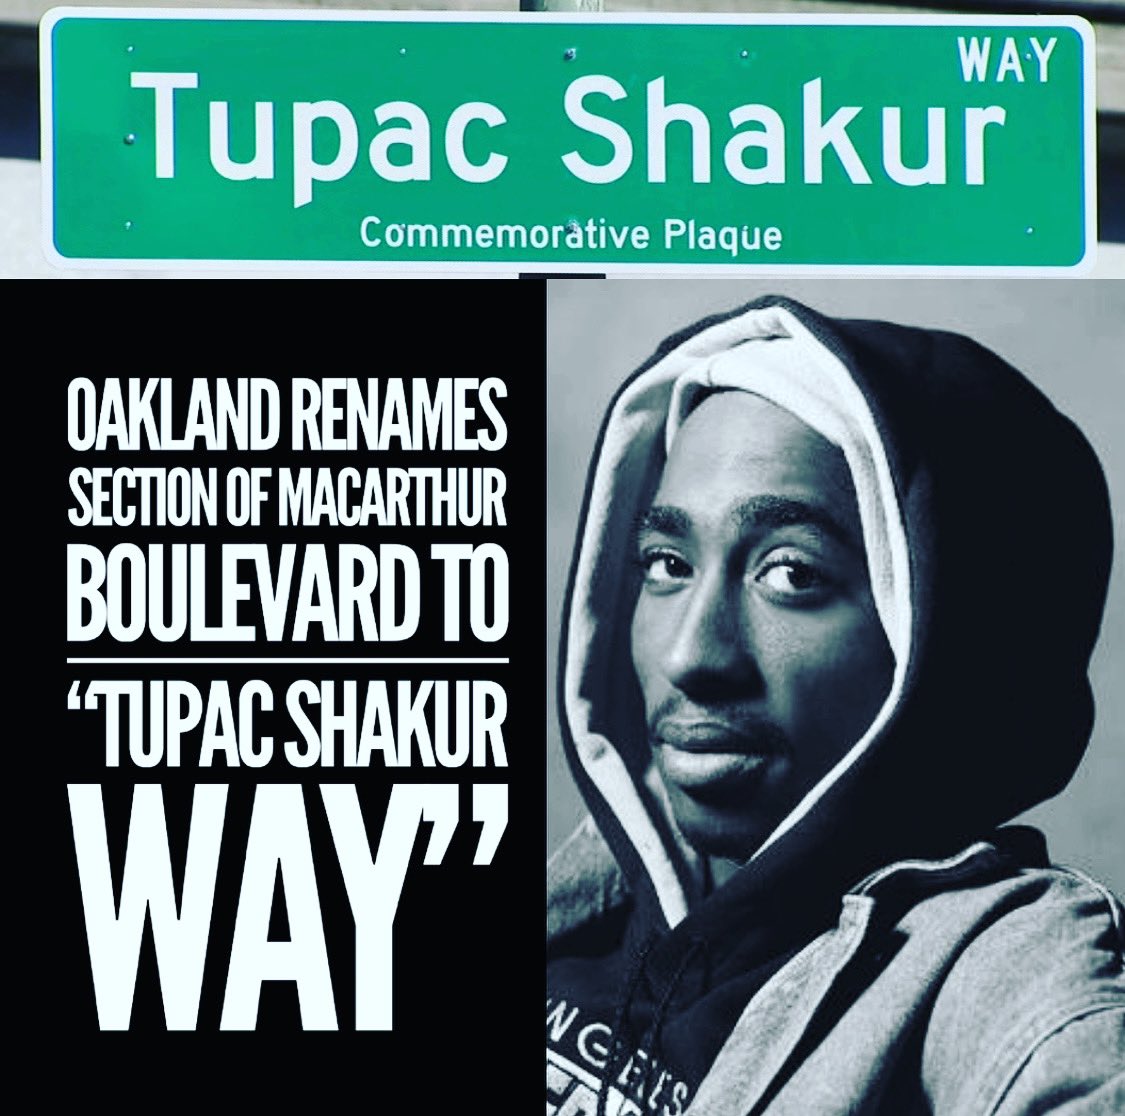 A section of MacArthur Boulevard in Oakland near where Tupac Shakur lived in the 90s has been renamed to “Tupac Shakur Way”. Salute to Tupac and his contribution to Hip-Hop and the Culture ✊🏾 #Hiphop #Rap #Culture #TupacShakurWay